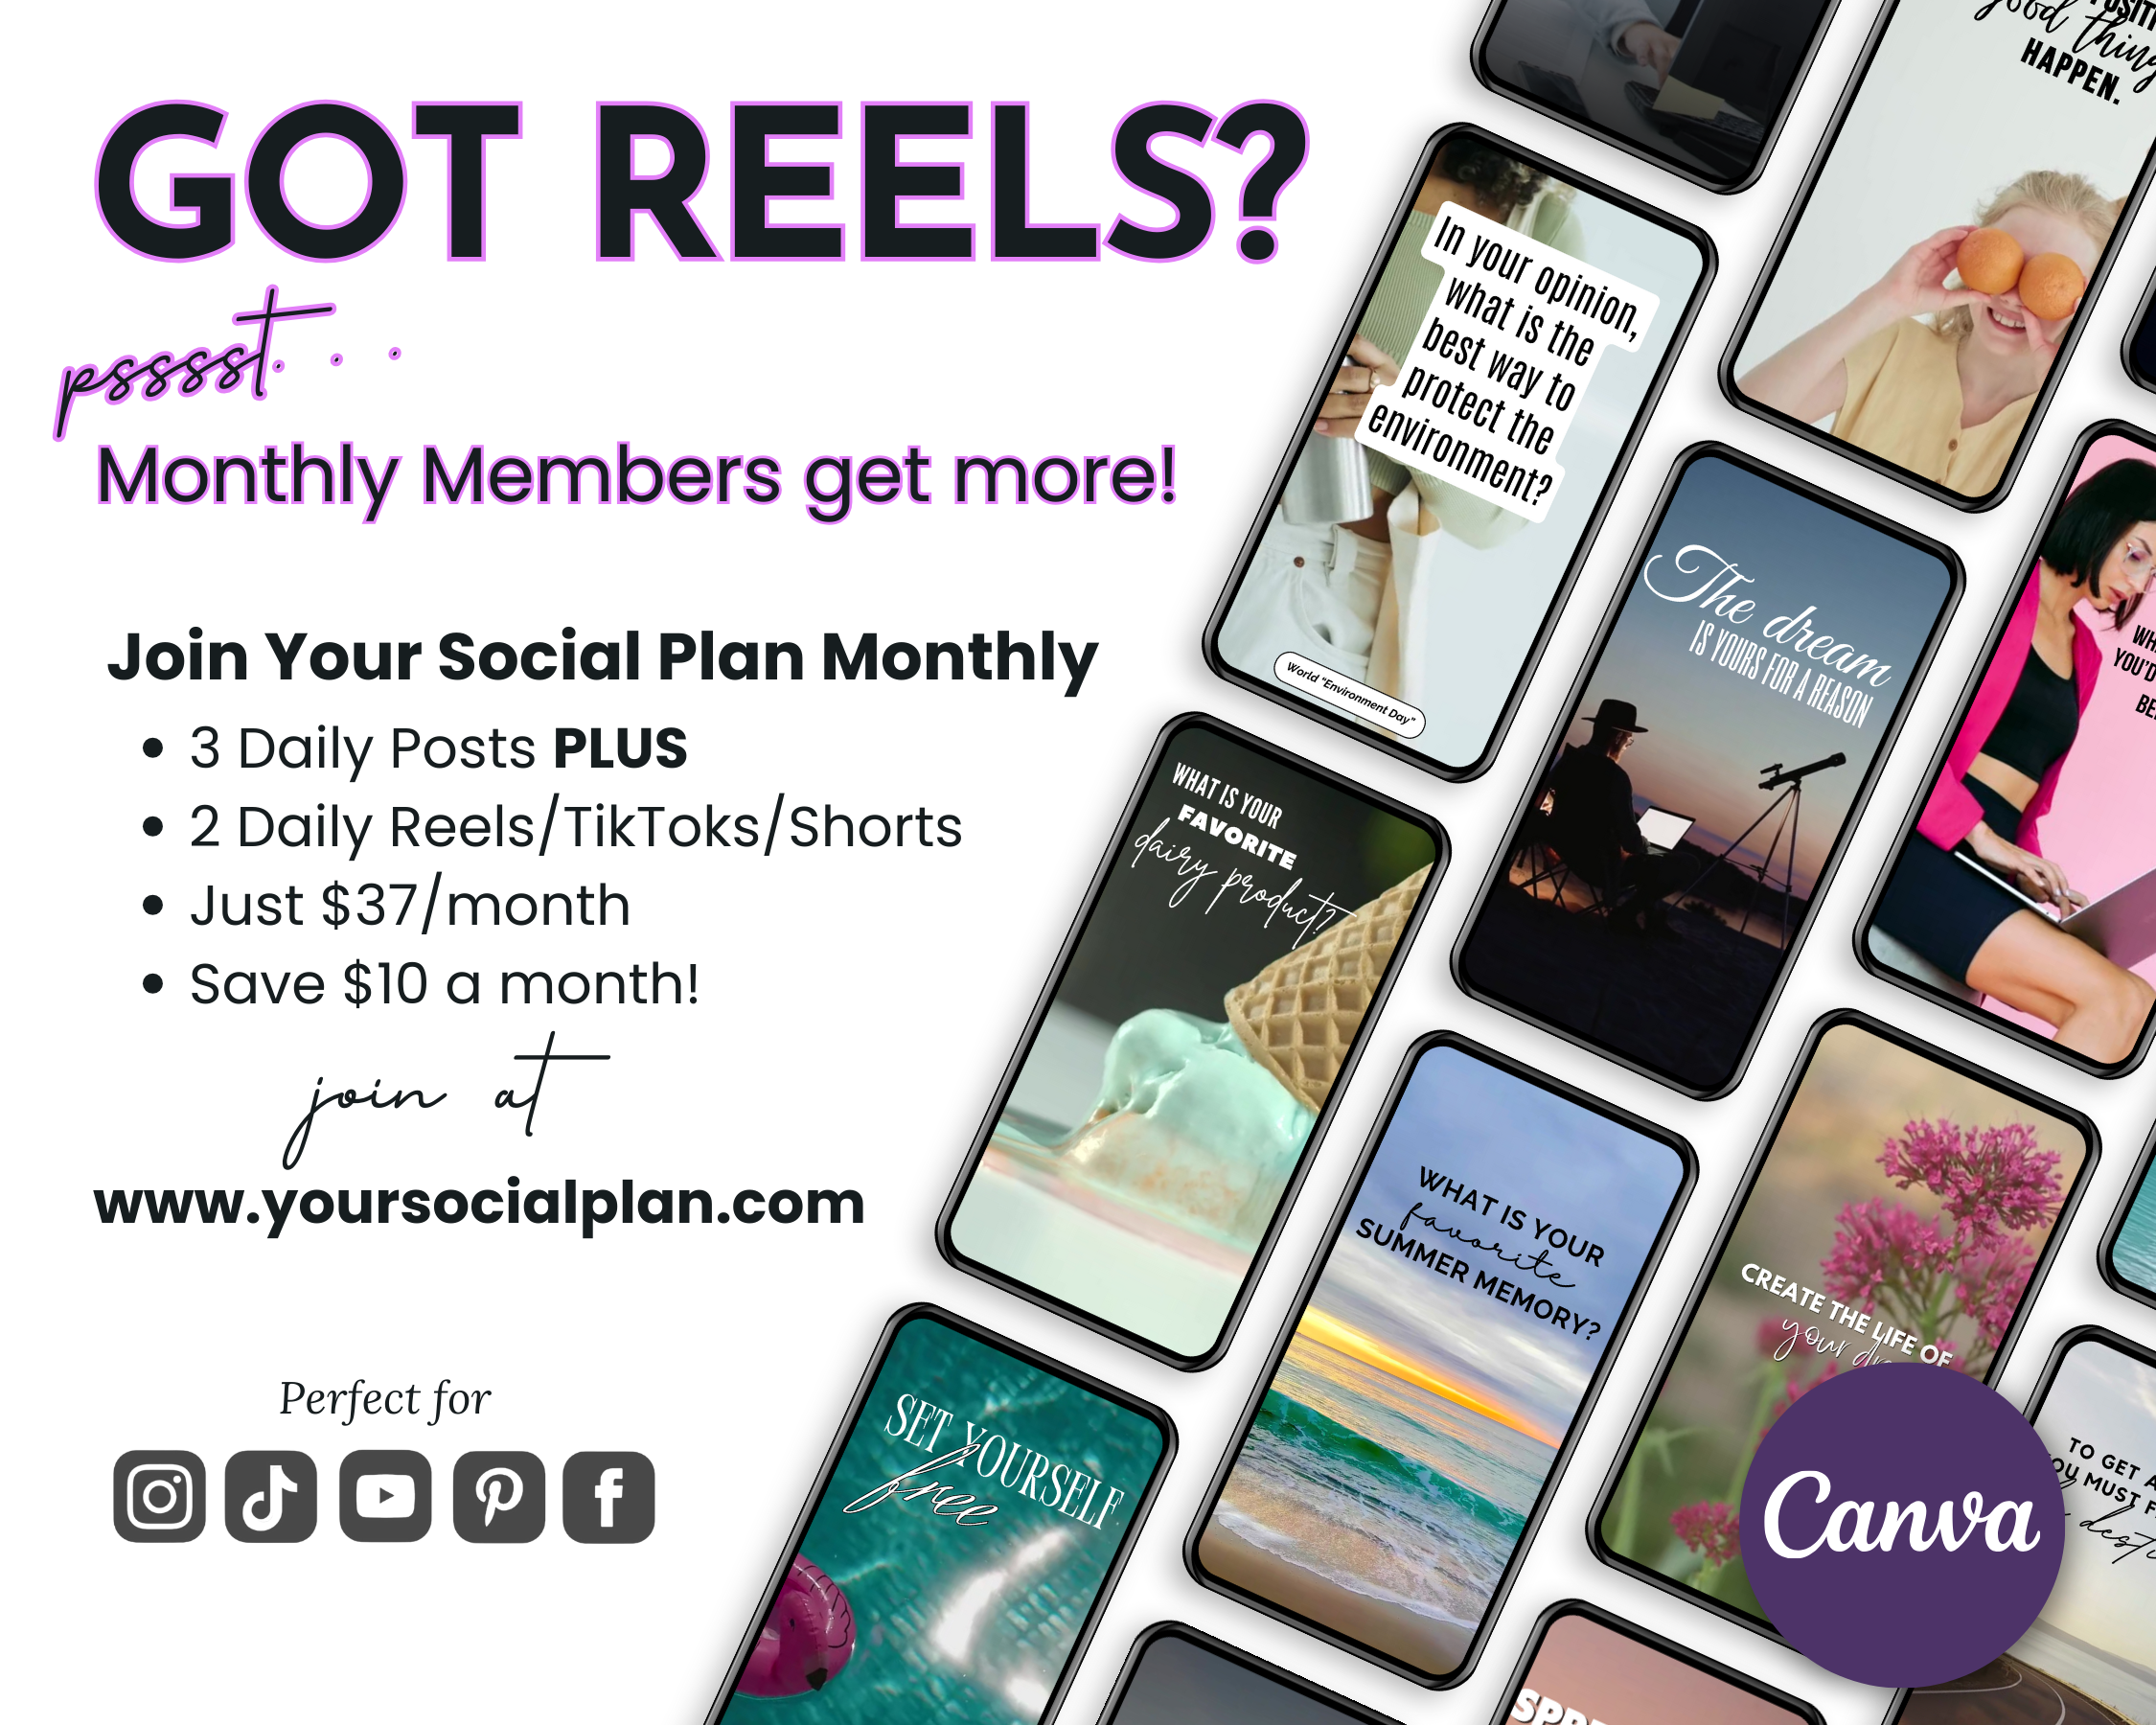 Promotional graphic for the June Daily Posting Plan - Your Social Plan, offered by Get Socially Inclined, offering monthly membership benefits including an MVP Strategy, displayed with various social media post examples.